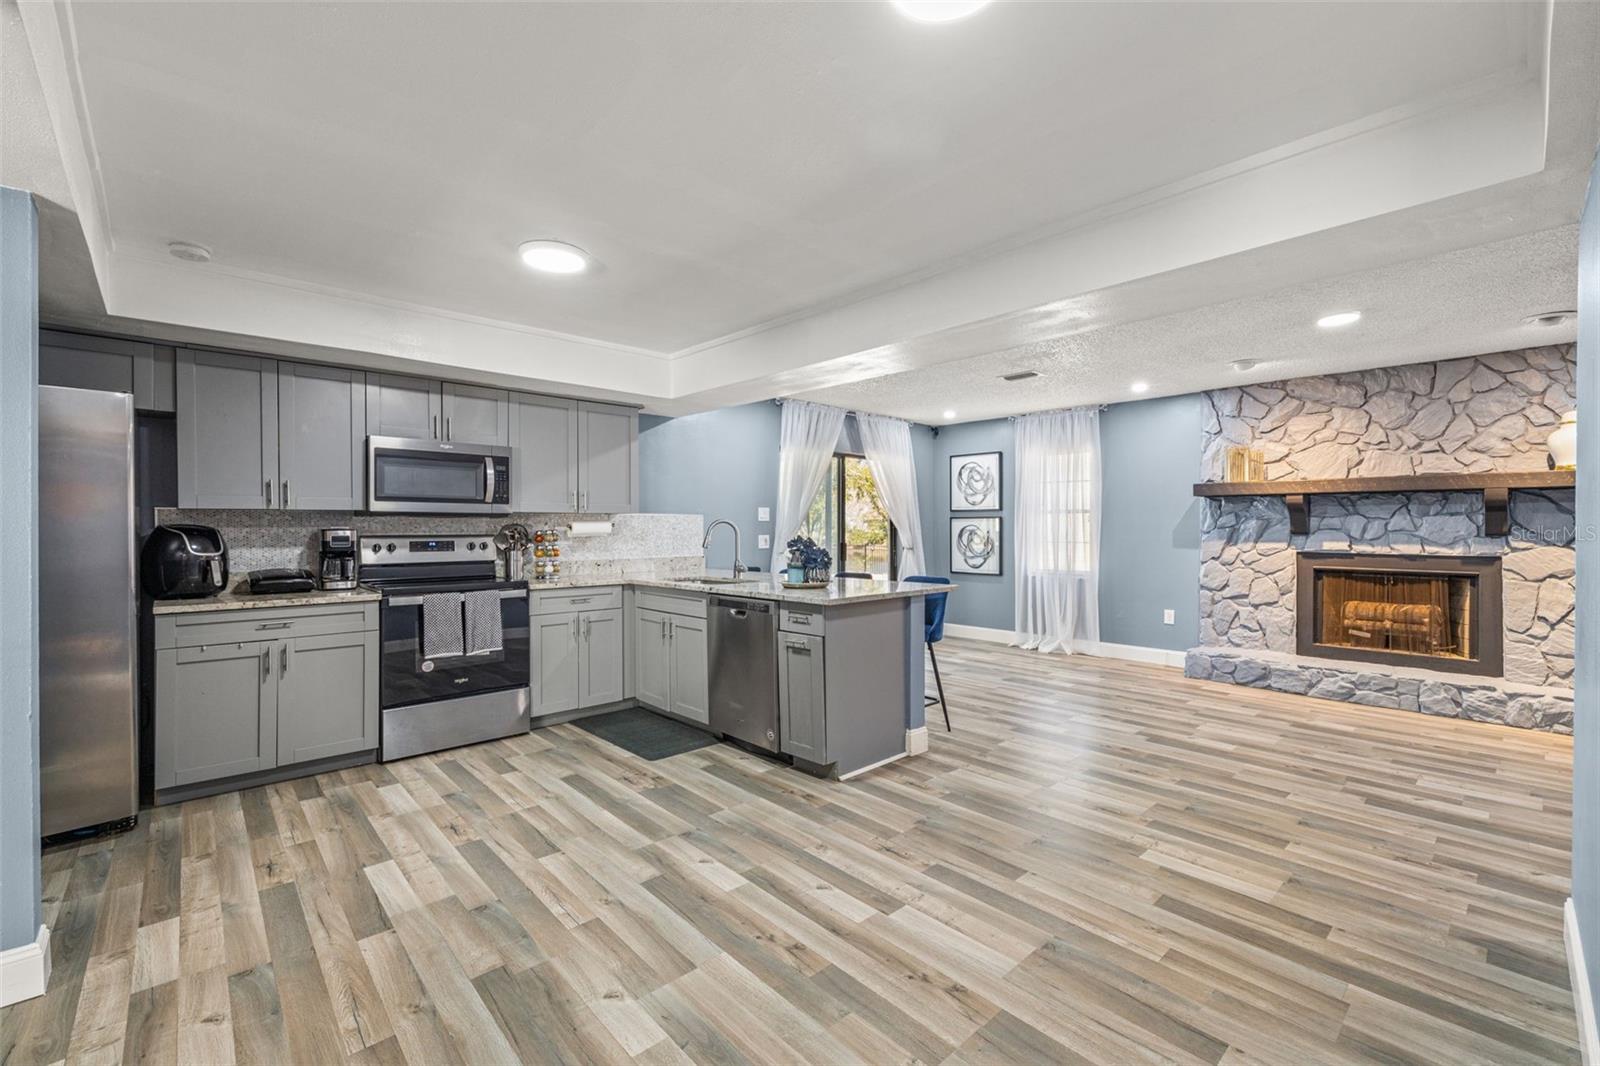 Look at this GORGEOUS kitchen! Completely renovated with new appliances, cabinets, countertops, sink and designer backsplash.  This kitchen opens to the  family room and an additional eating area.